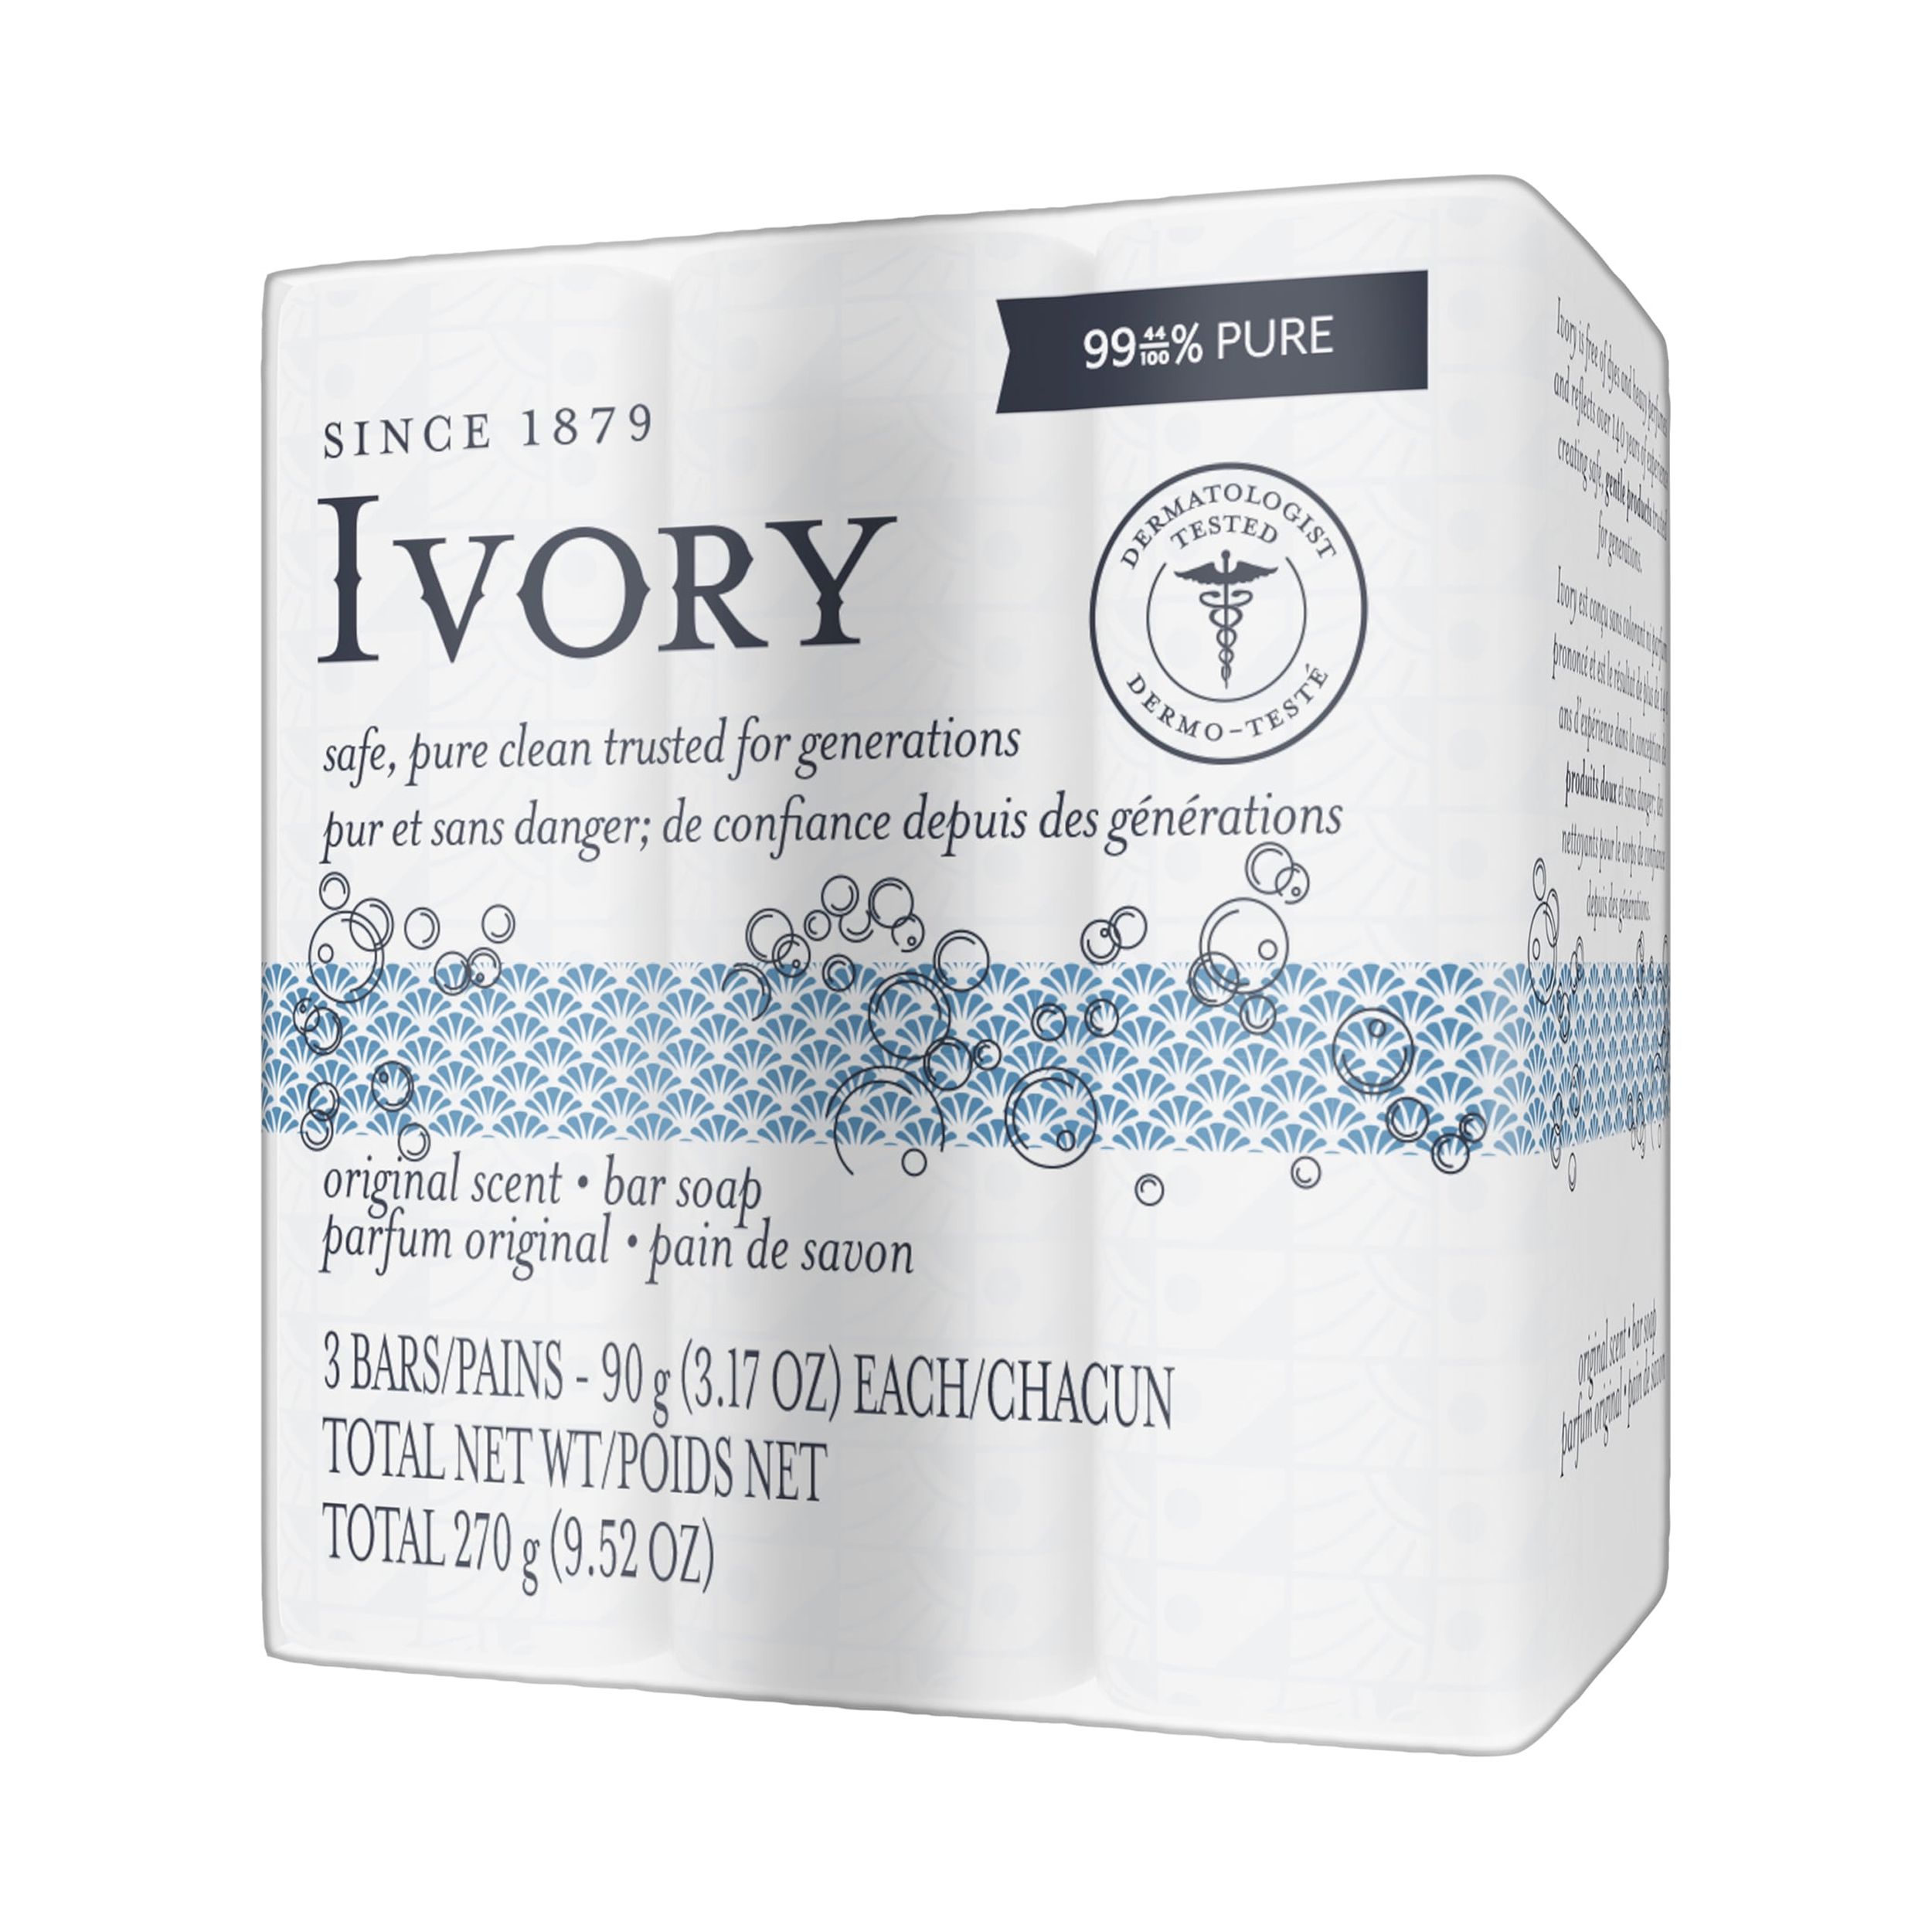 Ivory Bar Soap with Original Scent, 3.17 oz, 10 Count - image 3 of 8